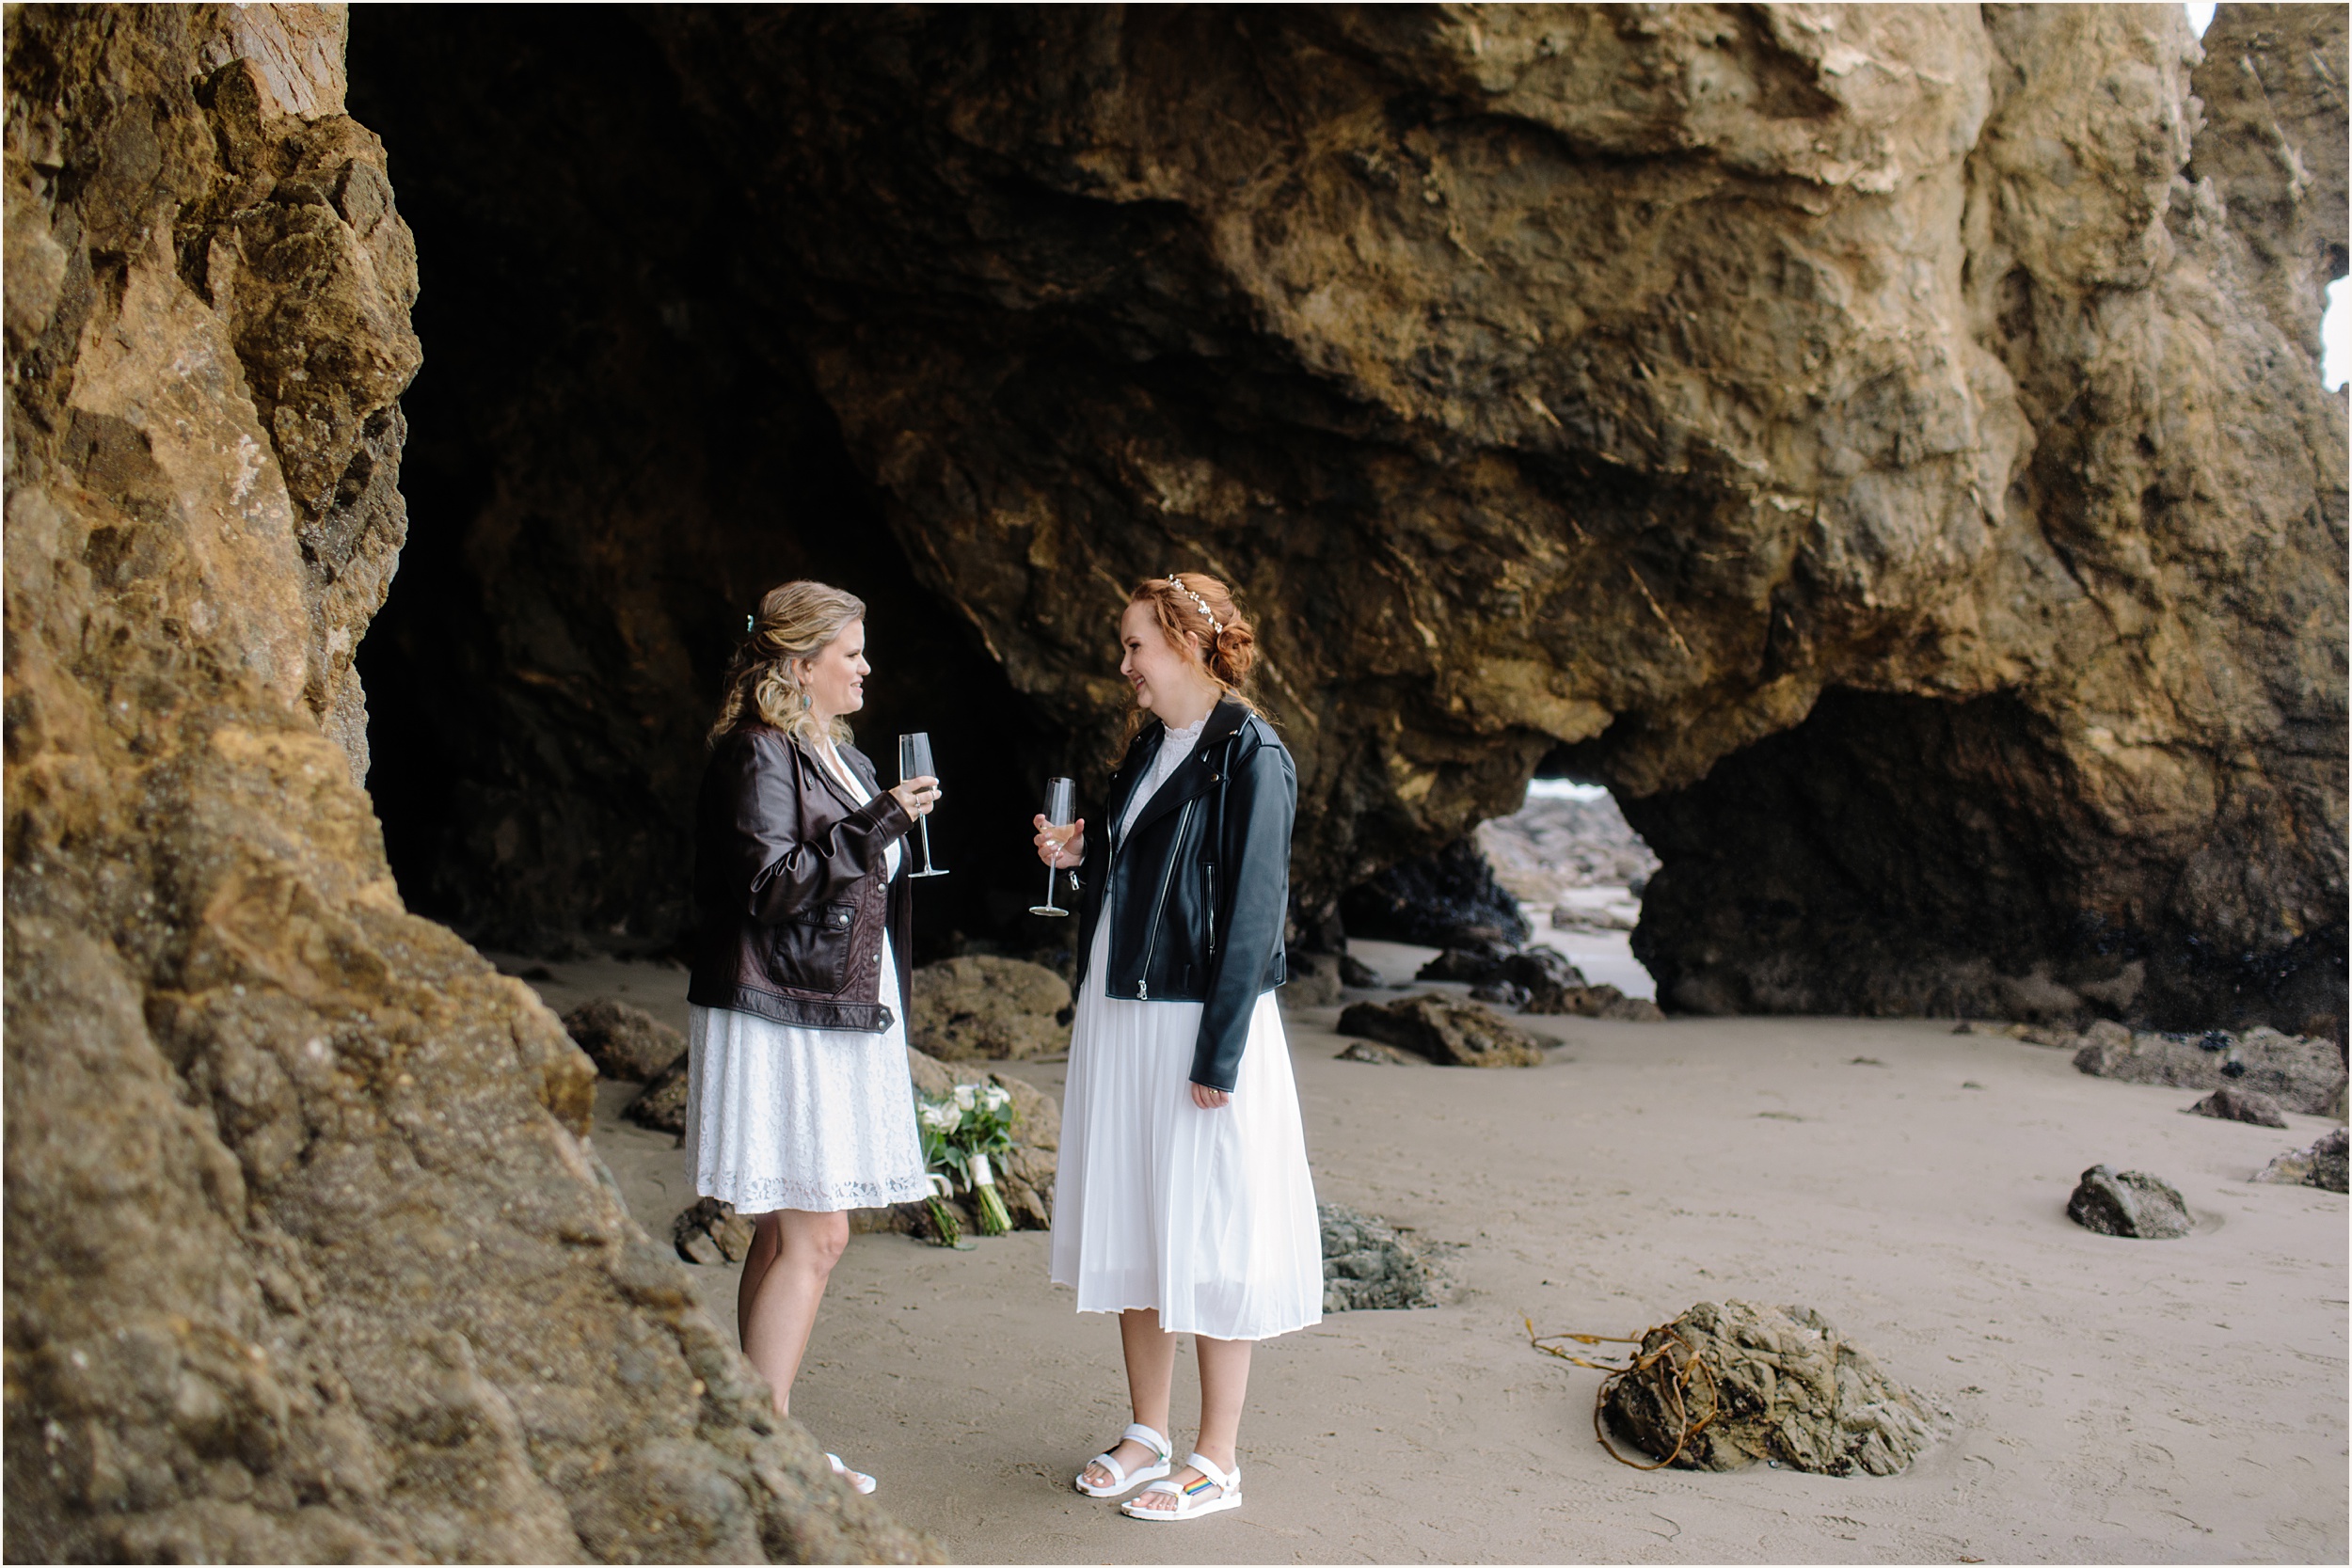 Photo of brides champagne toasting in stunning white lace elopement dresses and leather jackets at El Matador beach